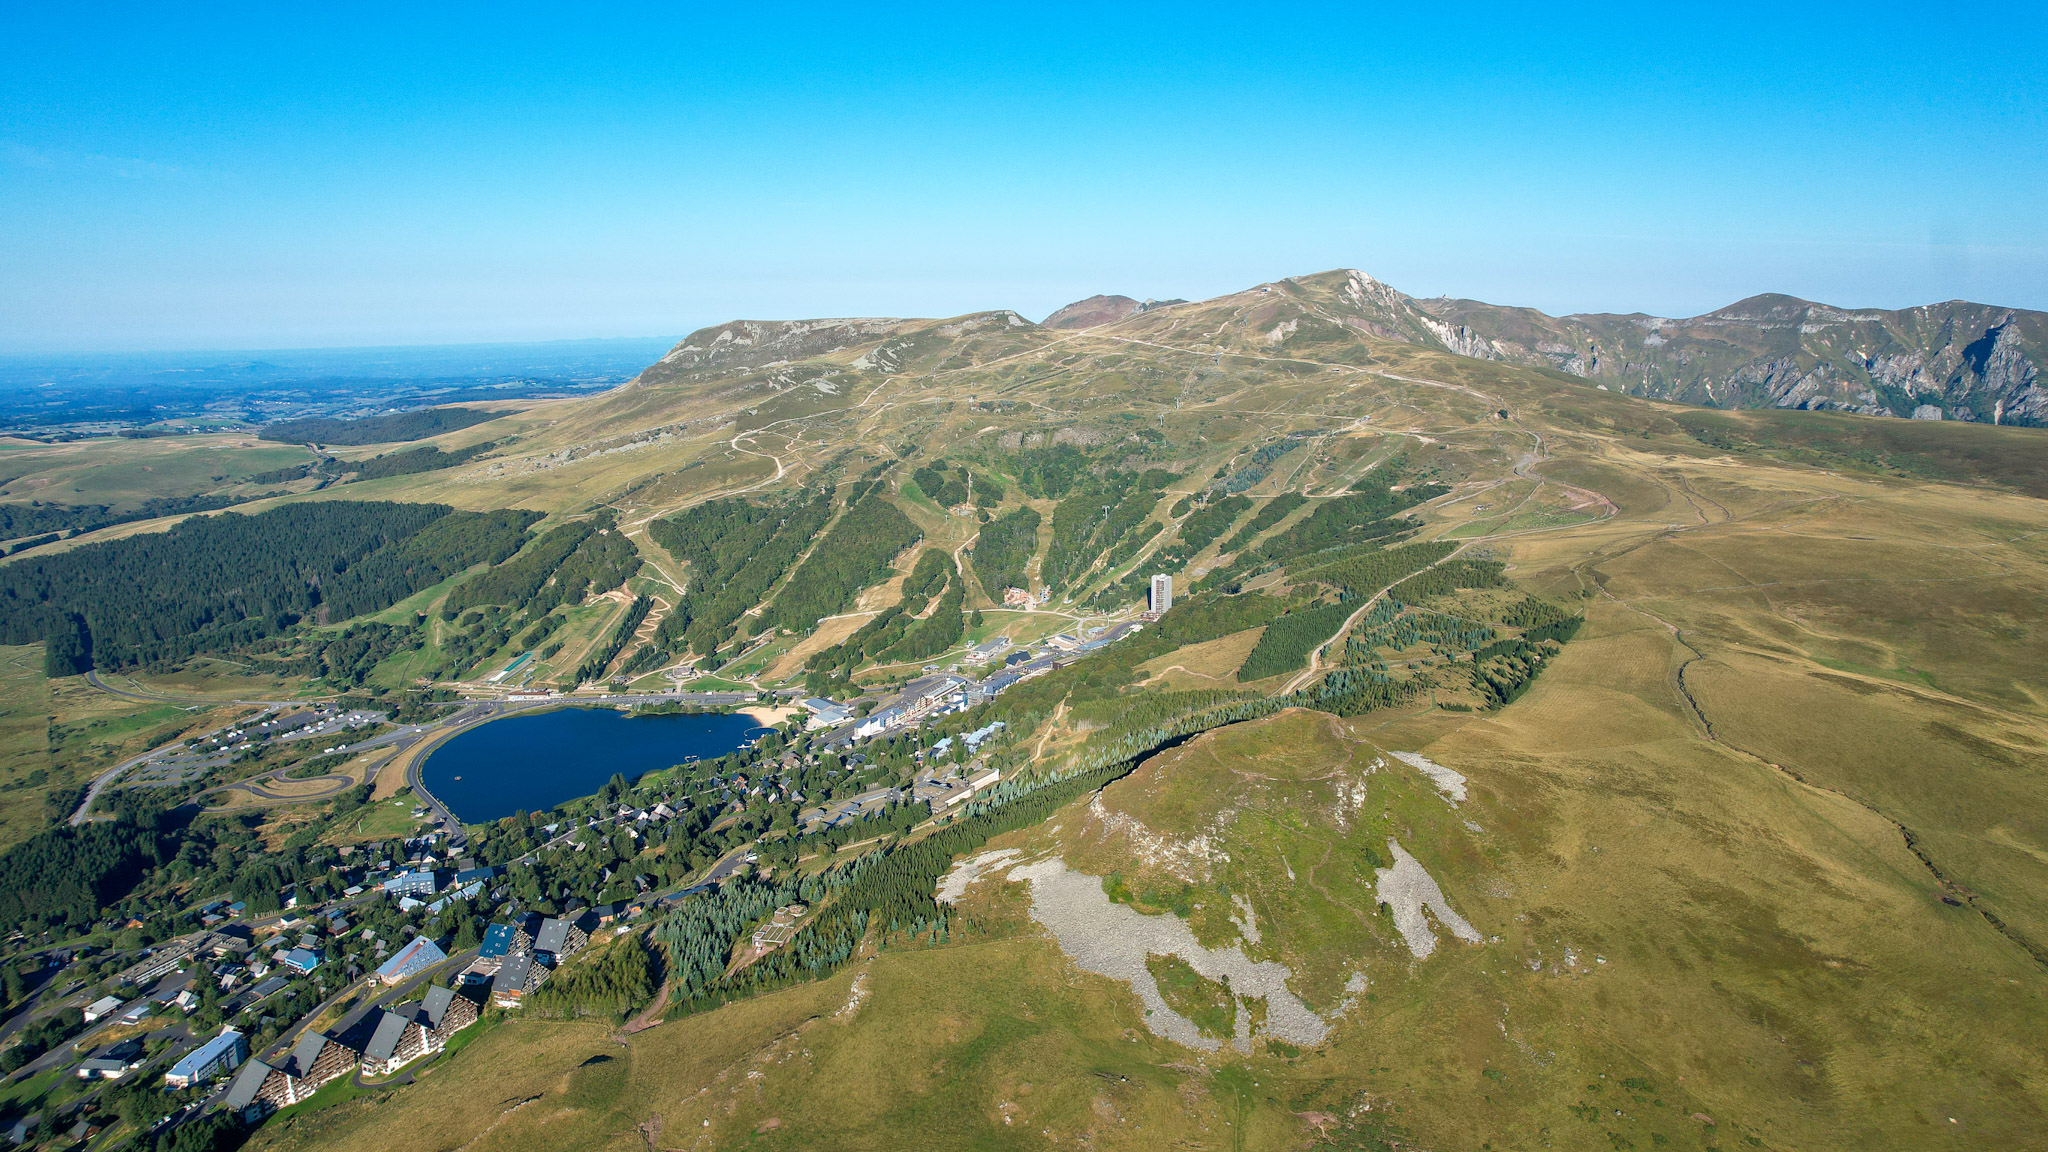 The Super Besse resort and its area, from Puy de Chambourguet to the slopes of Puy de Paillaret